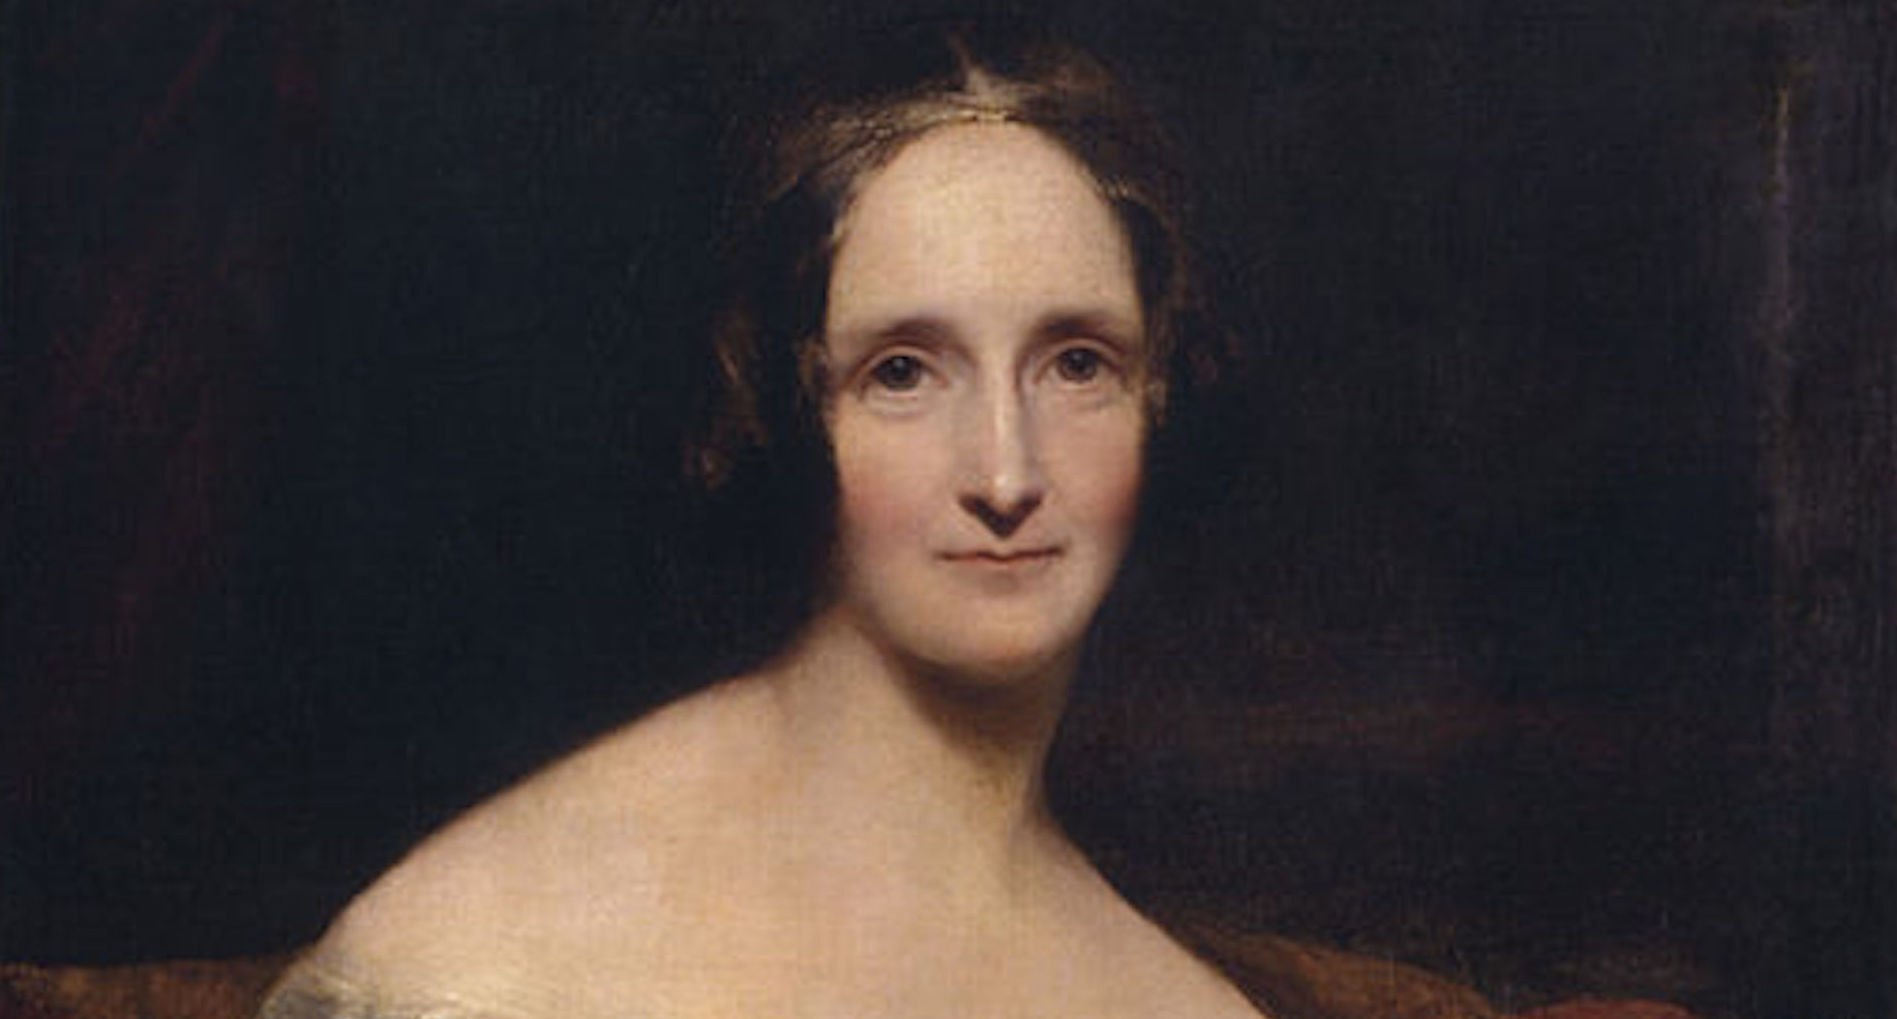 Mary Shelley, the author of "Frankenstein".